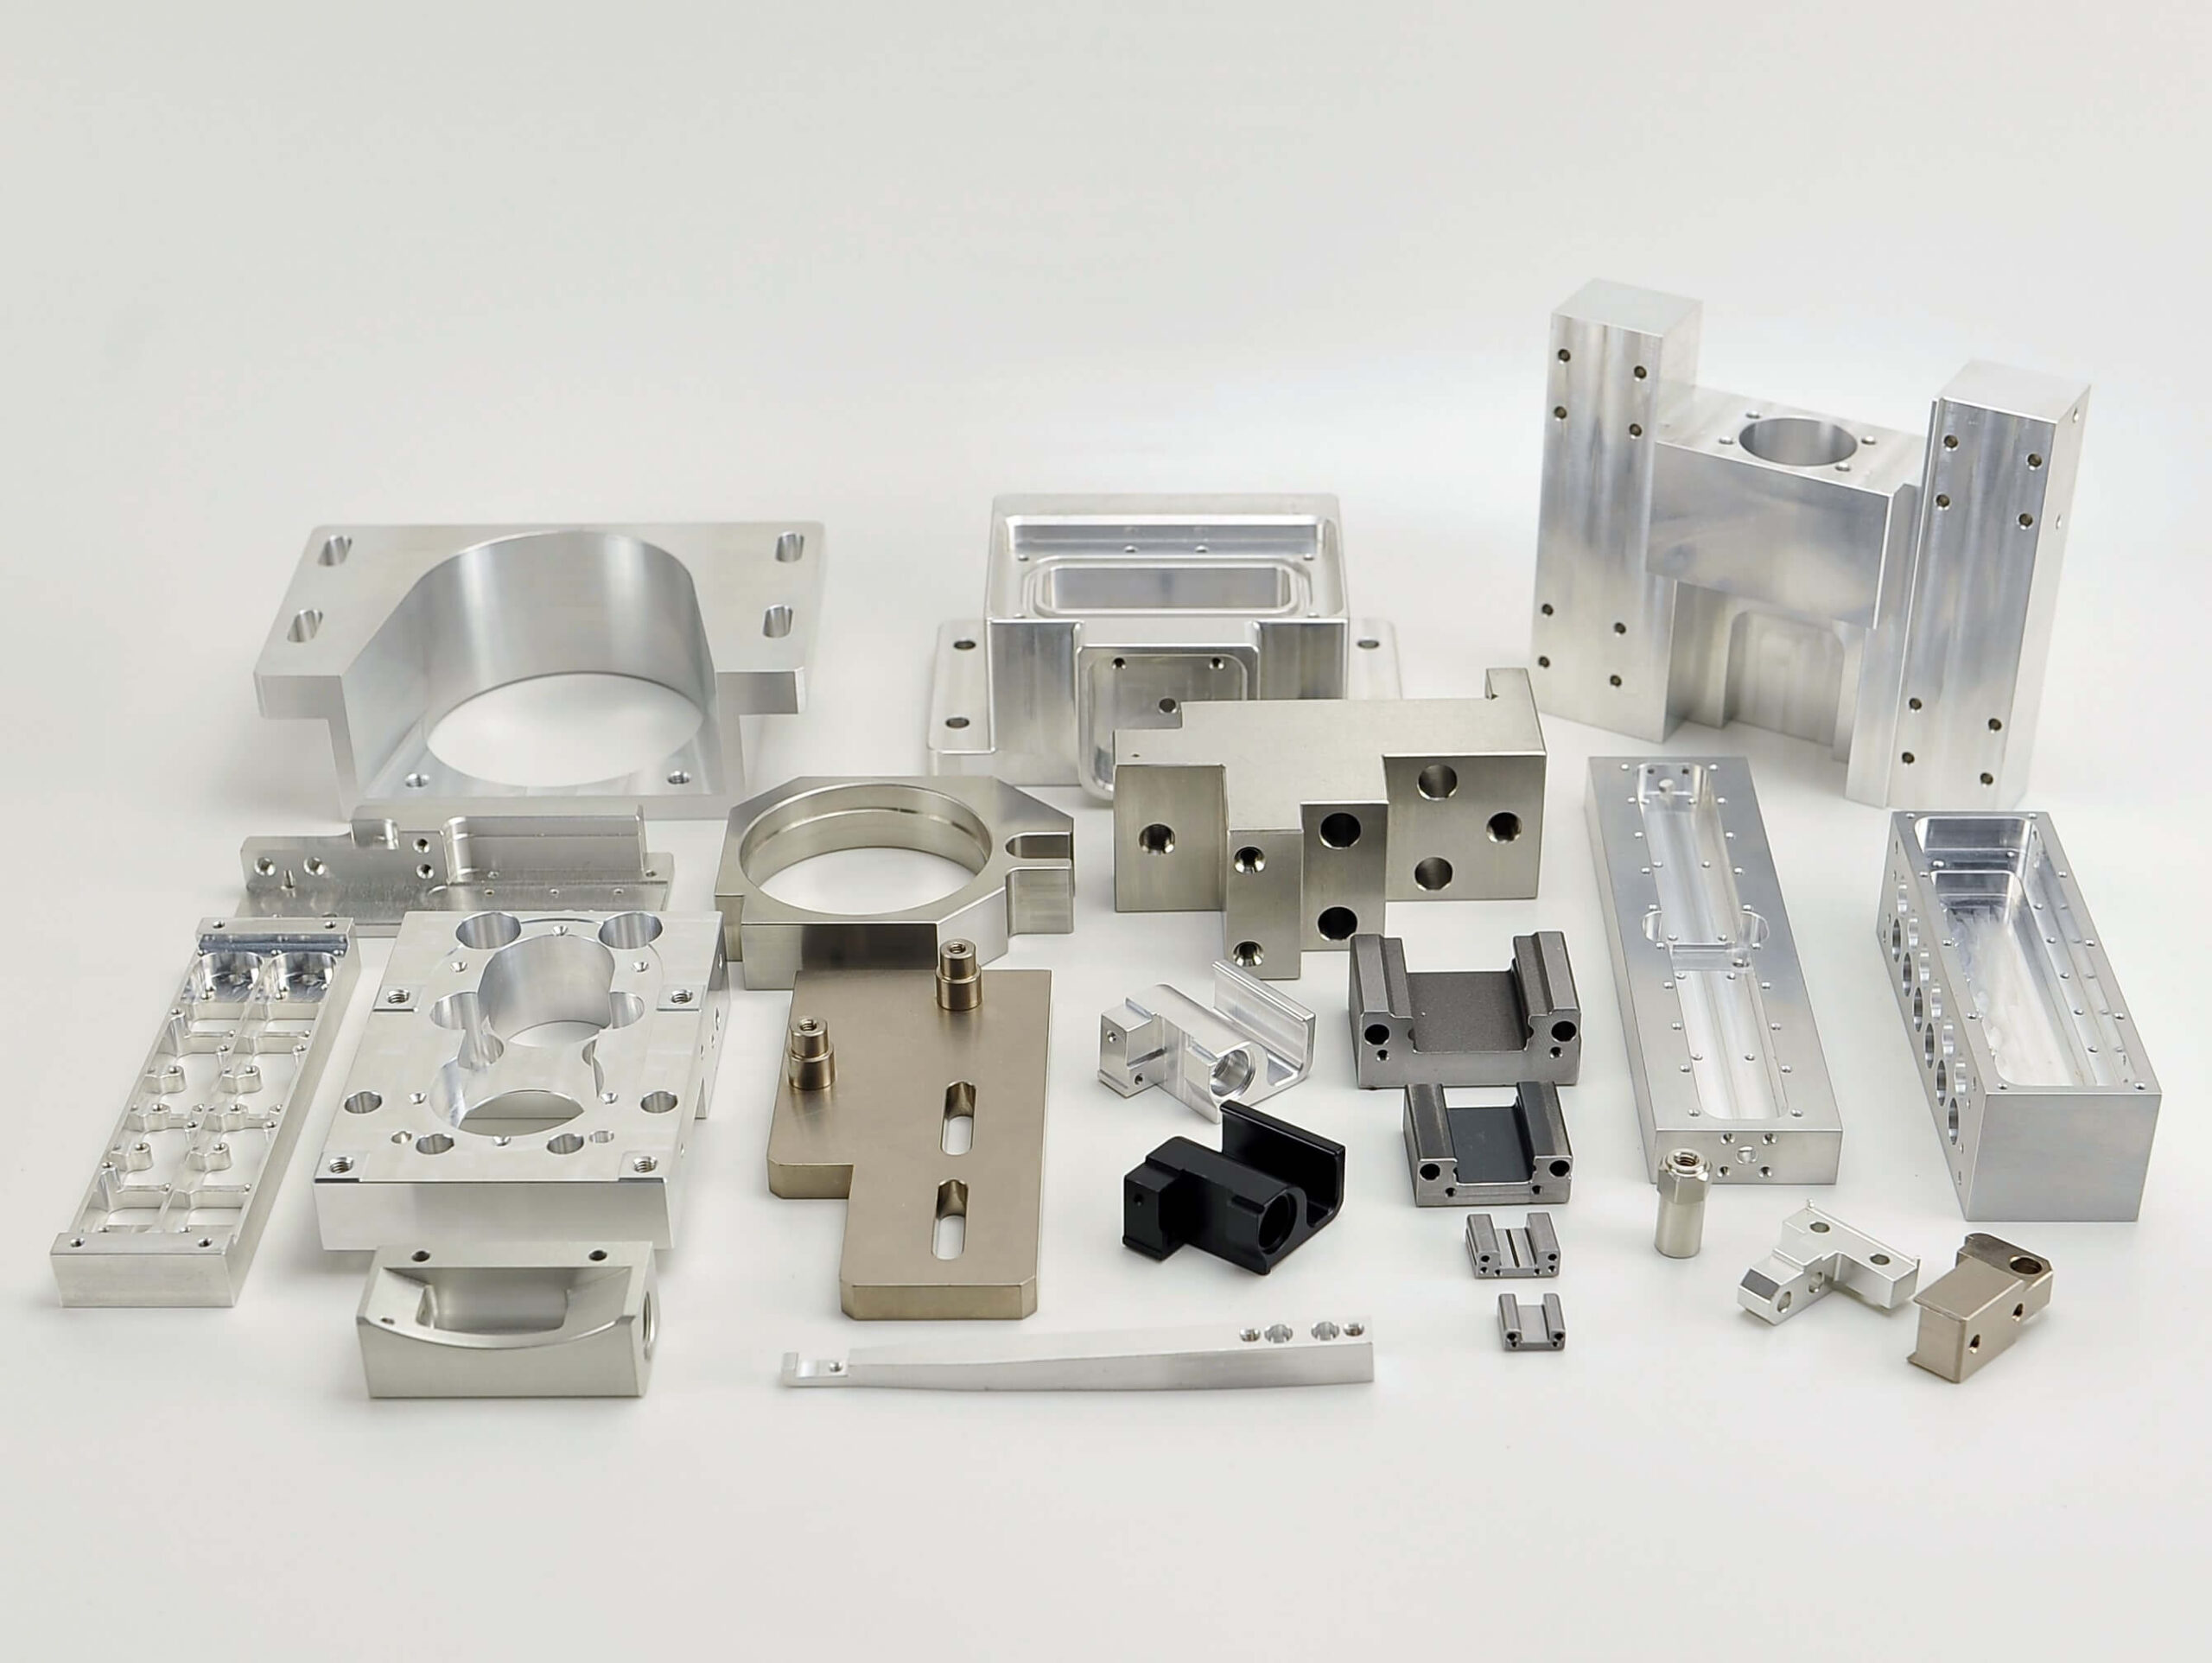 What is CNC Machining and How Does it Work?